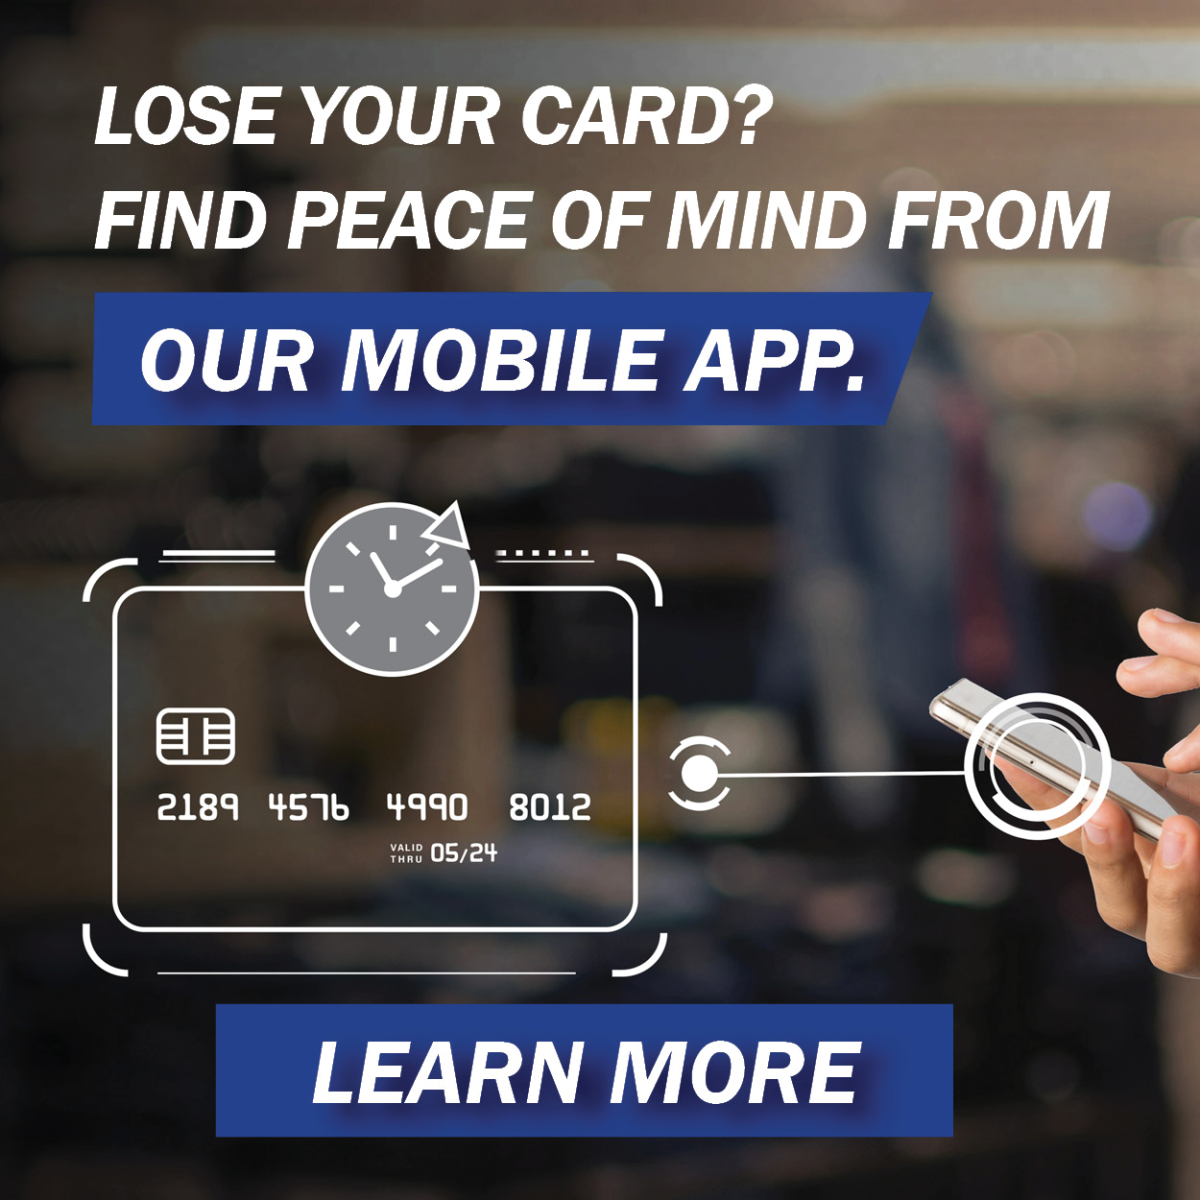 Try card secure for your debit card!